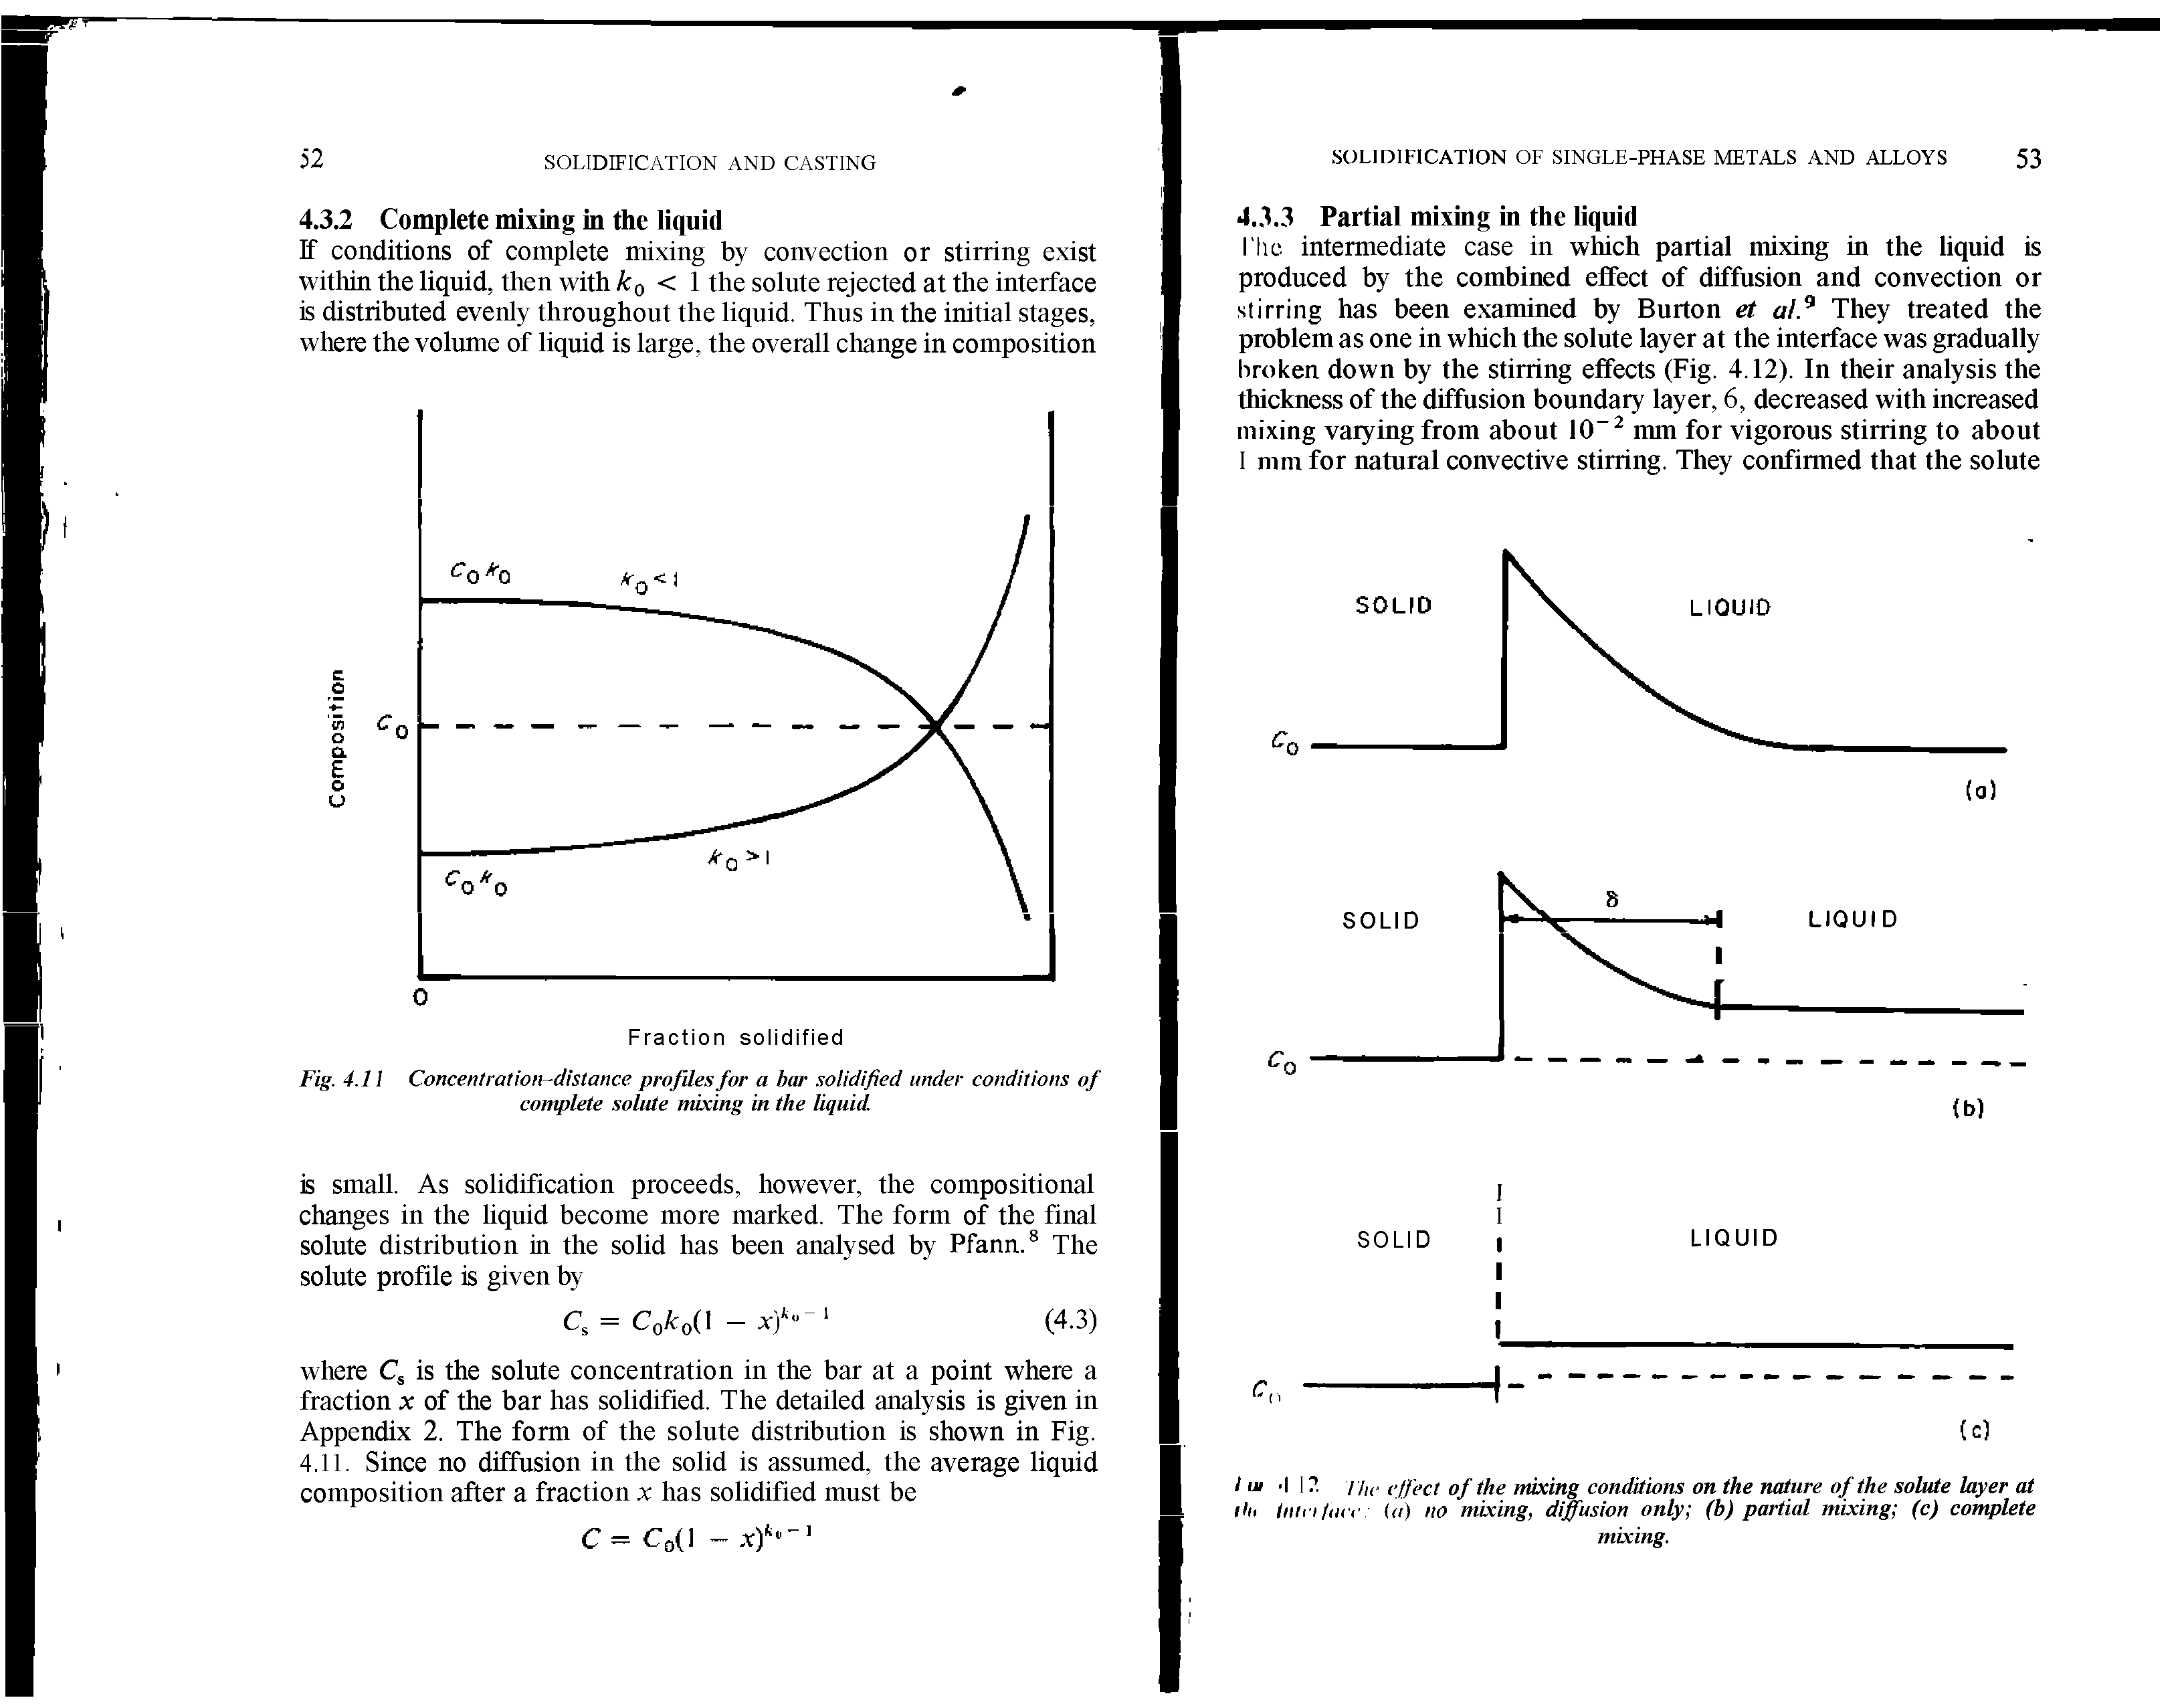 Fig. 4.11 Concentration-distance profiles for a bar solidified under conditions of complete solute mixing in the liquid.